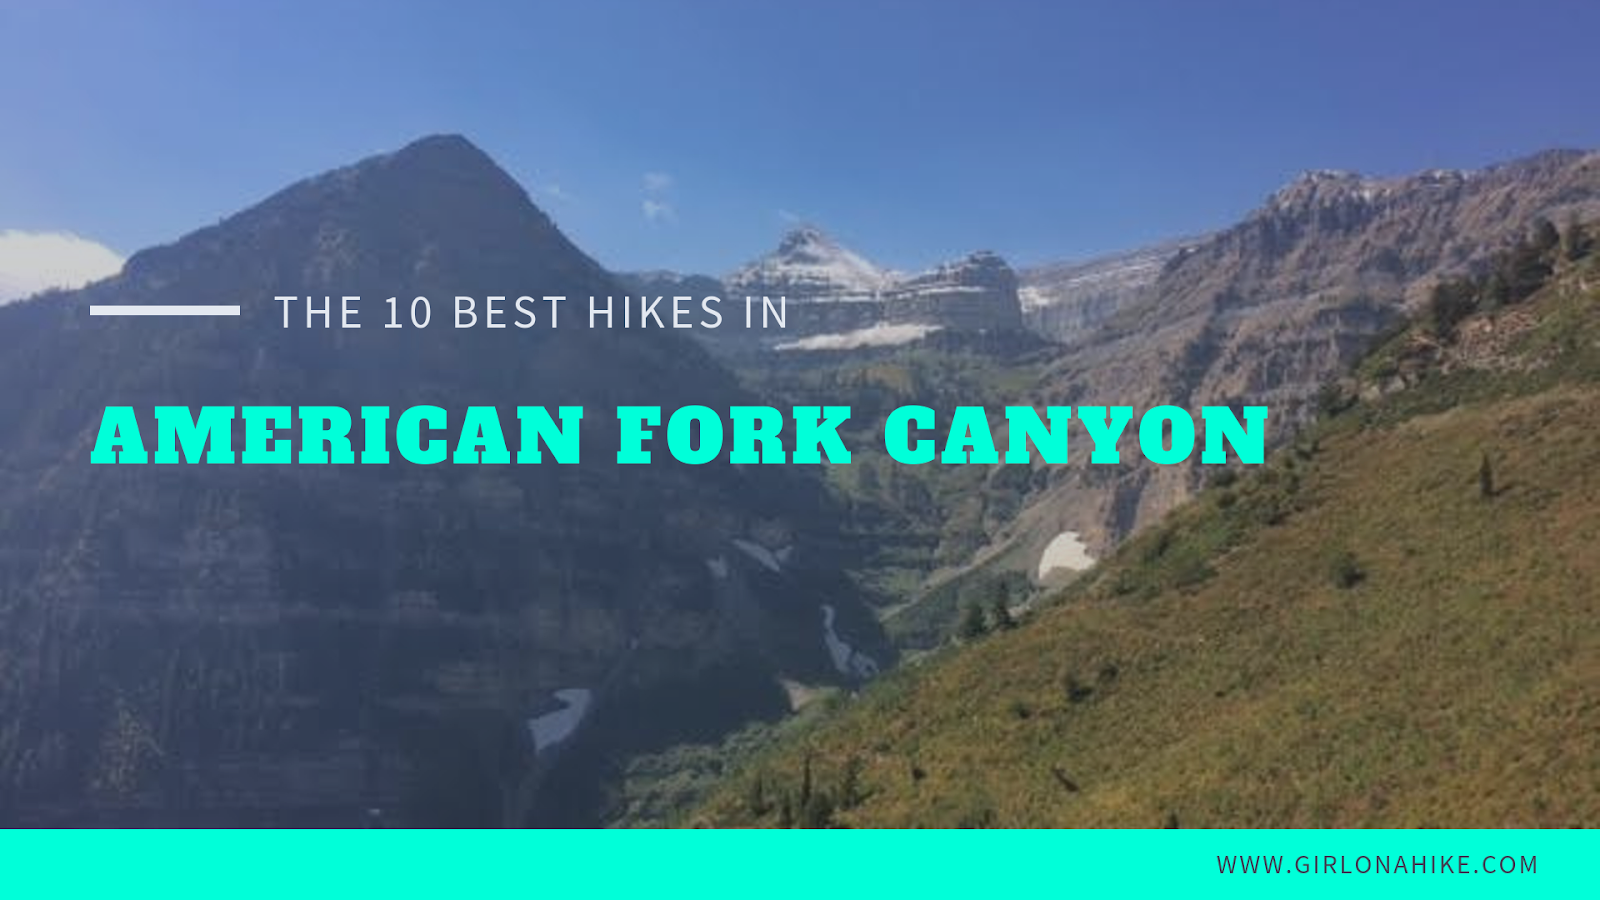 The Top 10 Hikes in American Fork Canyon, American fork canyon best hikes and trails, best views in American fork canyon